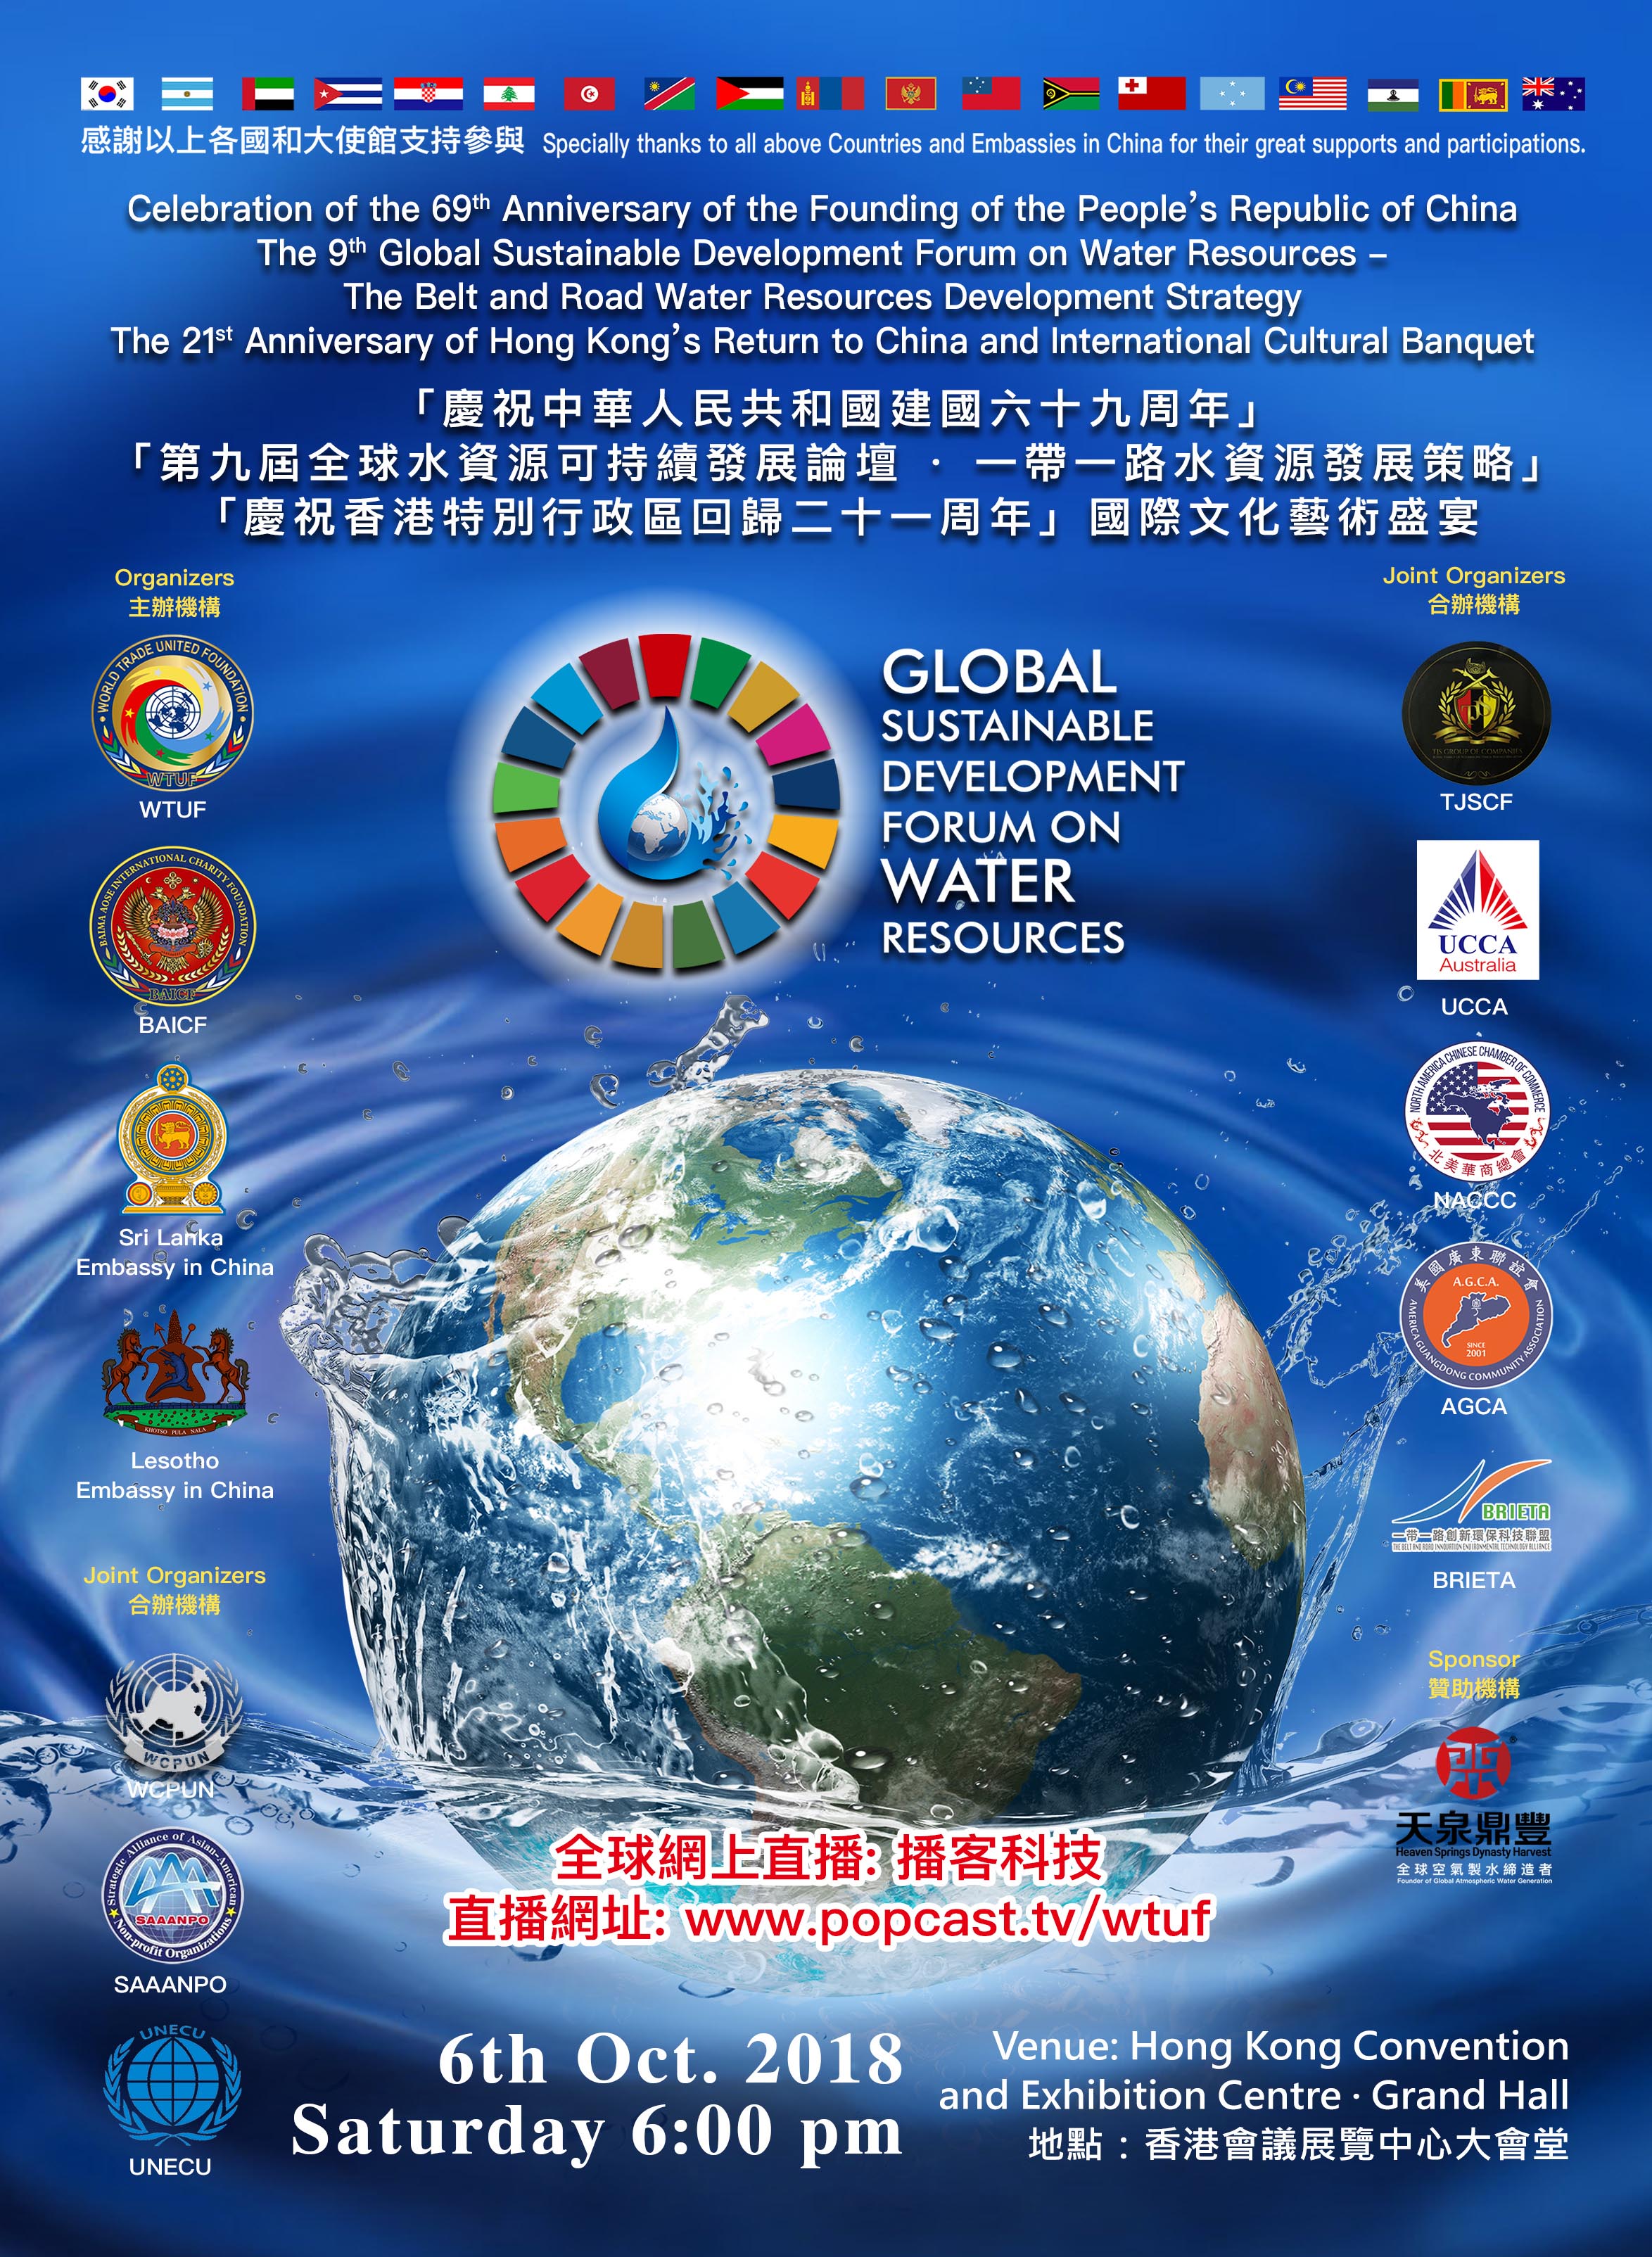 The 9th Global Sustainable Development Forum on Water Resources